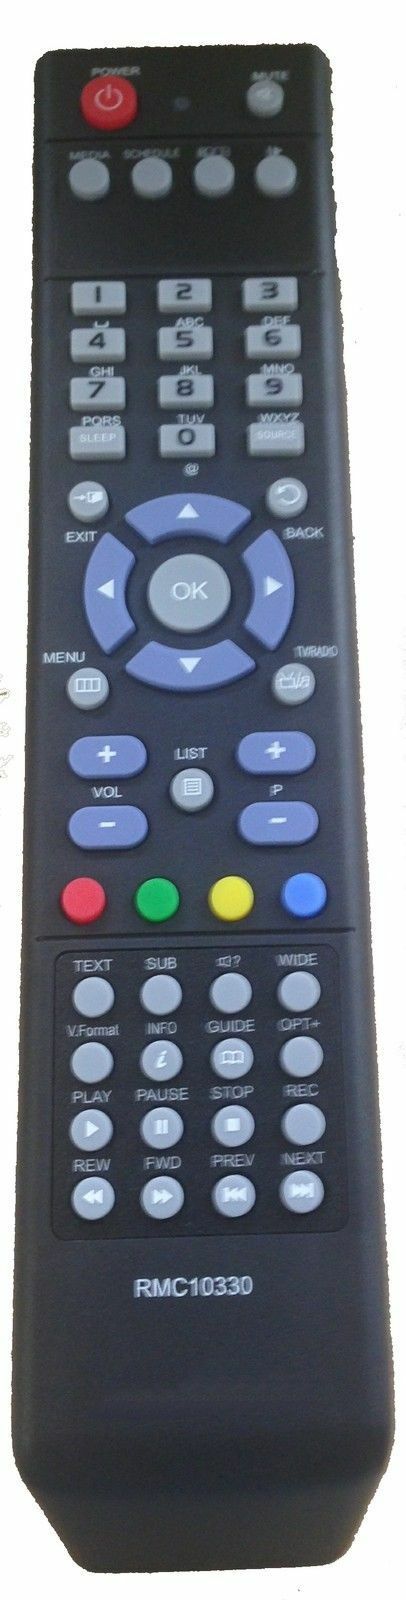 Replacement Remote Control for Xcruiser XDSR385HD Avant PVR / Xcruiser XDSR600